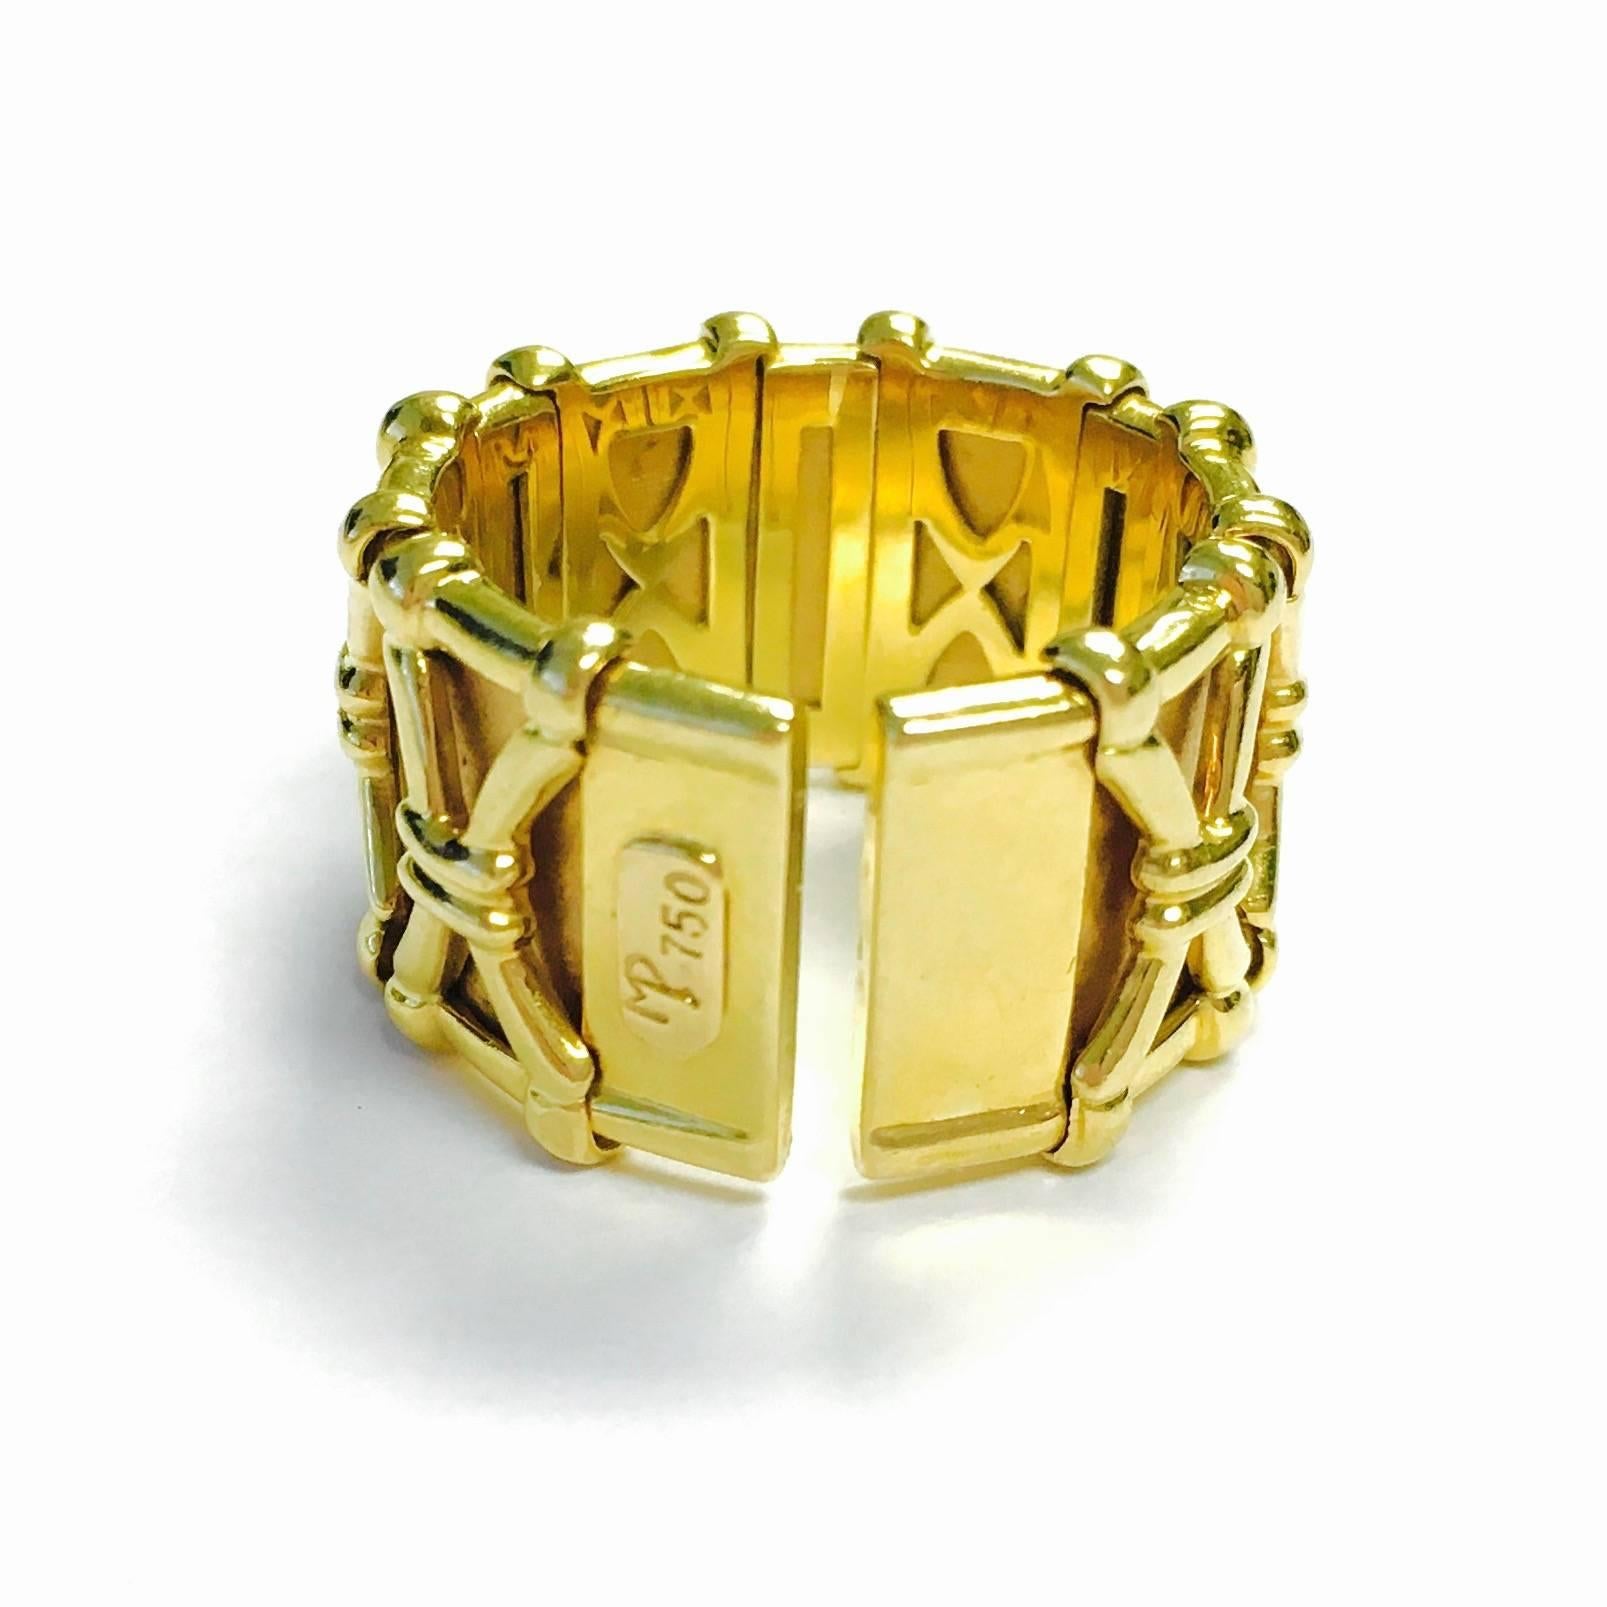 18K yellow gold 0.5 inch wide, open cuff style ring with twelve round brilliant cut diamonds, set in bezels. The ring is a size 6.5, but it does flex enough to allow to comfortably slip onsize 7 finger. This flexible design works great for us with